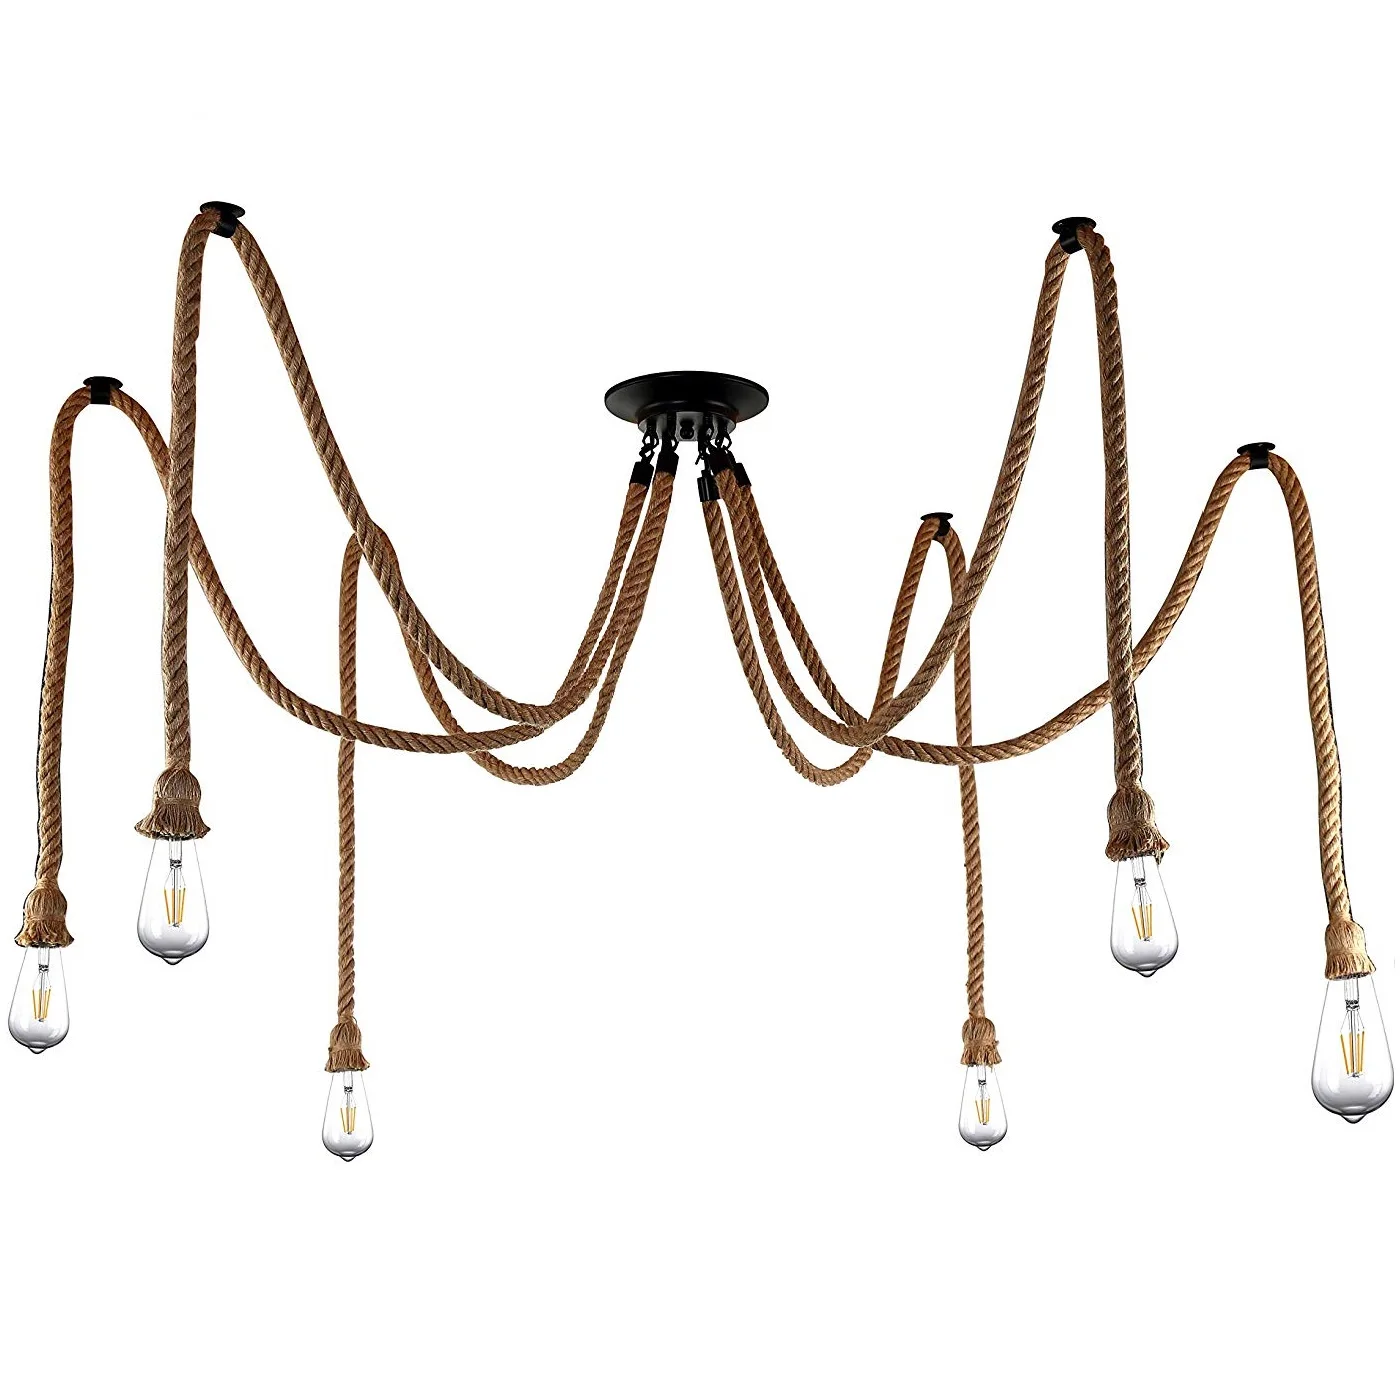 6 Heads American Country Retro Industrial Hemp Rope Chandelier Living Room Restaurant pendant lights light Fixture Not Included Bulb